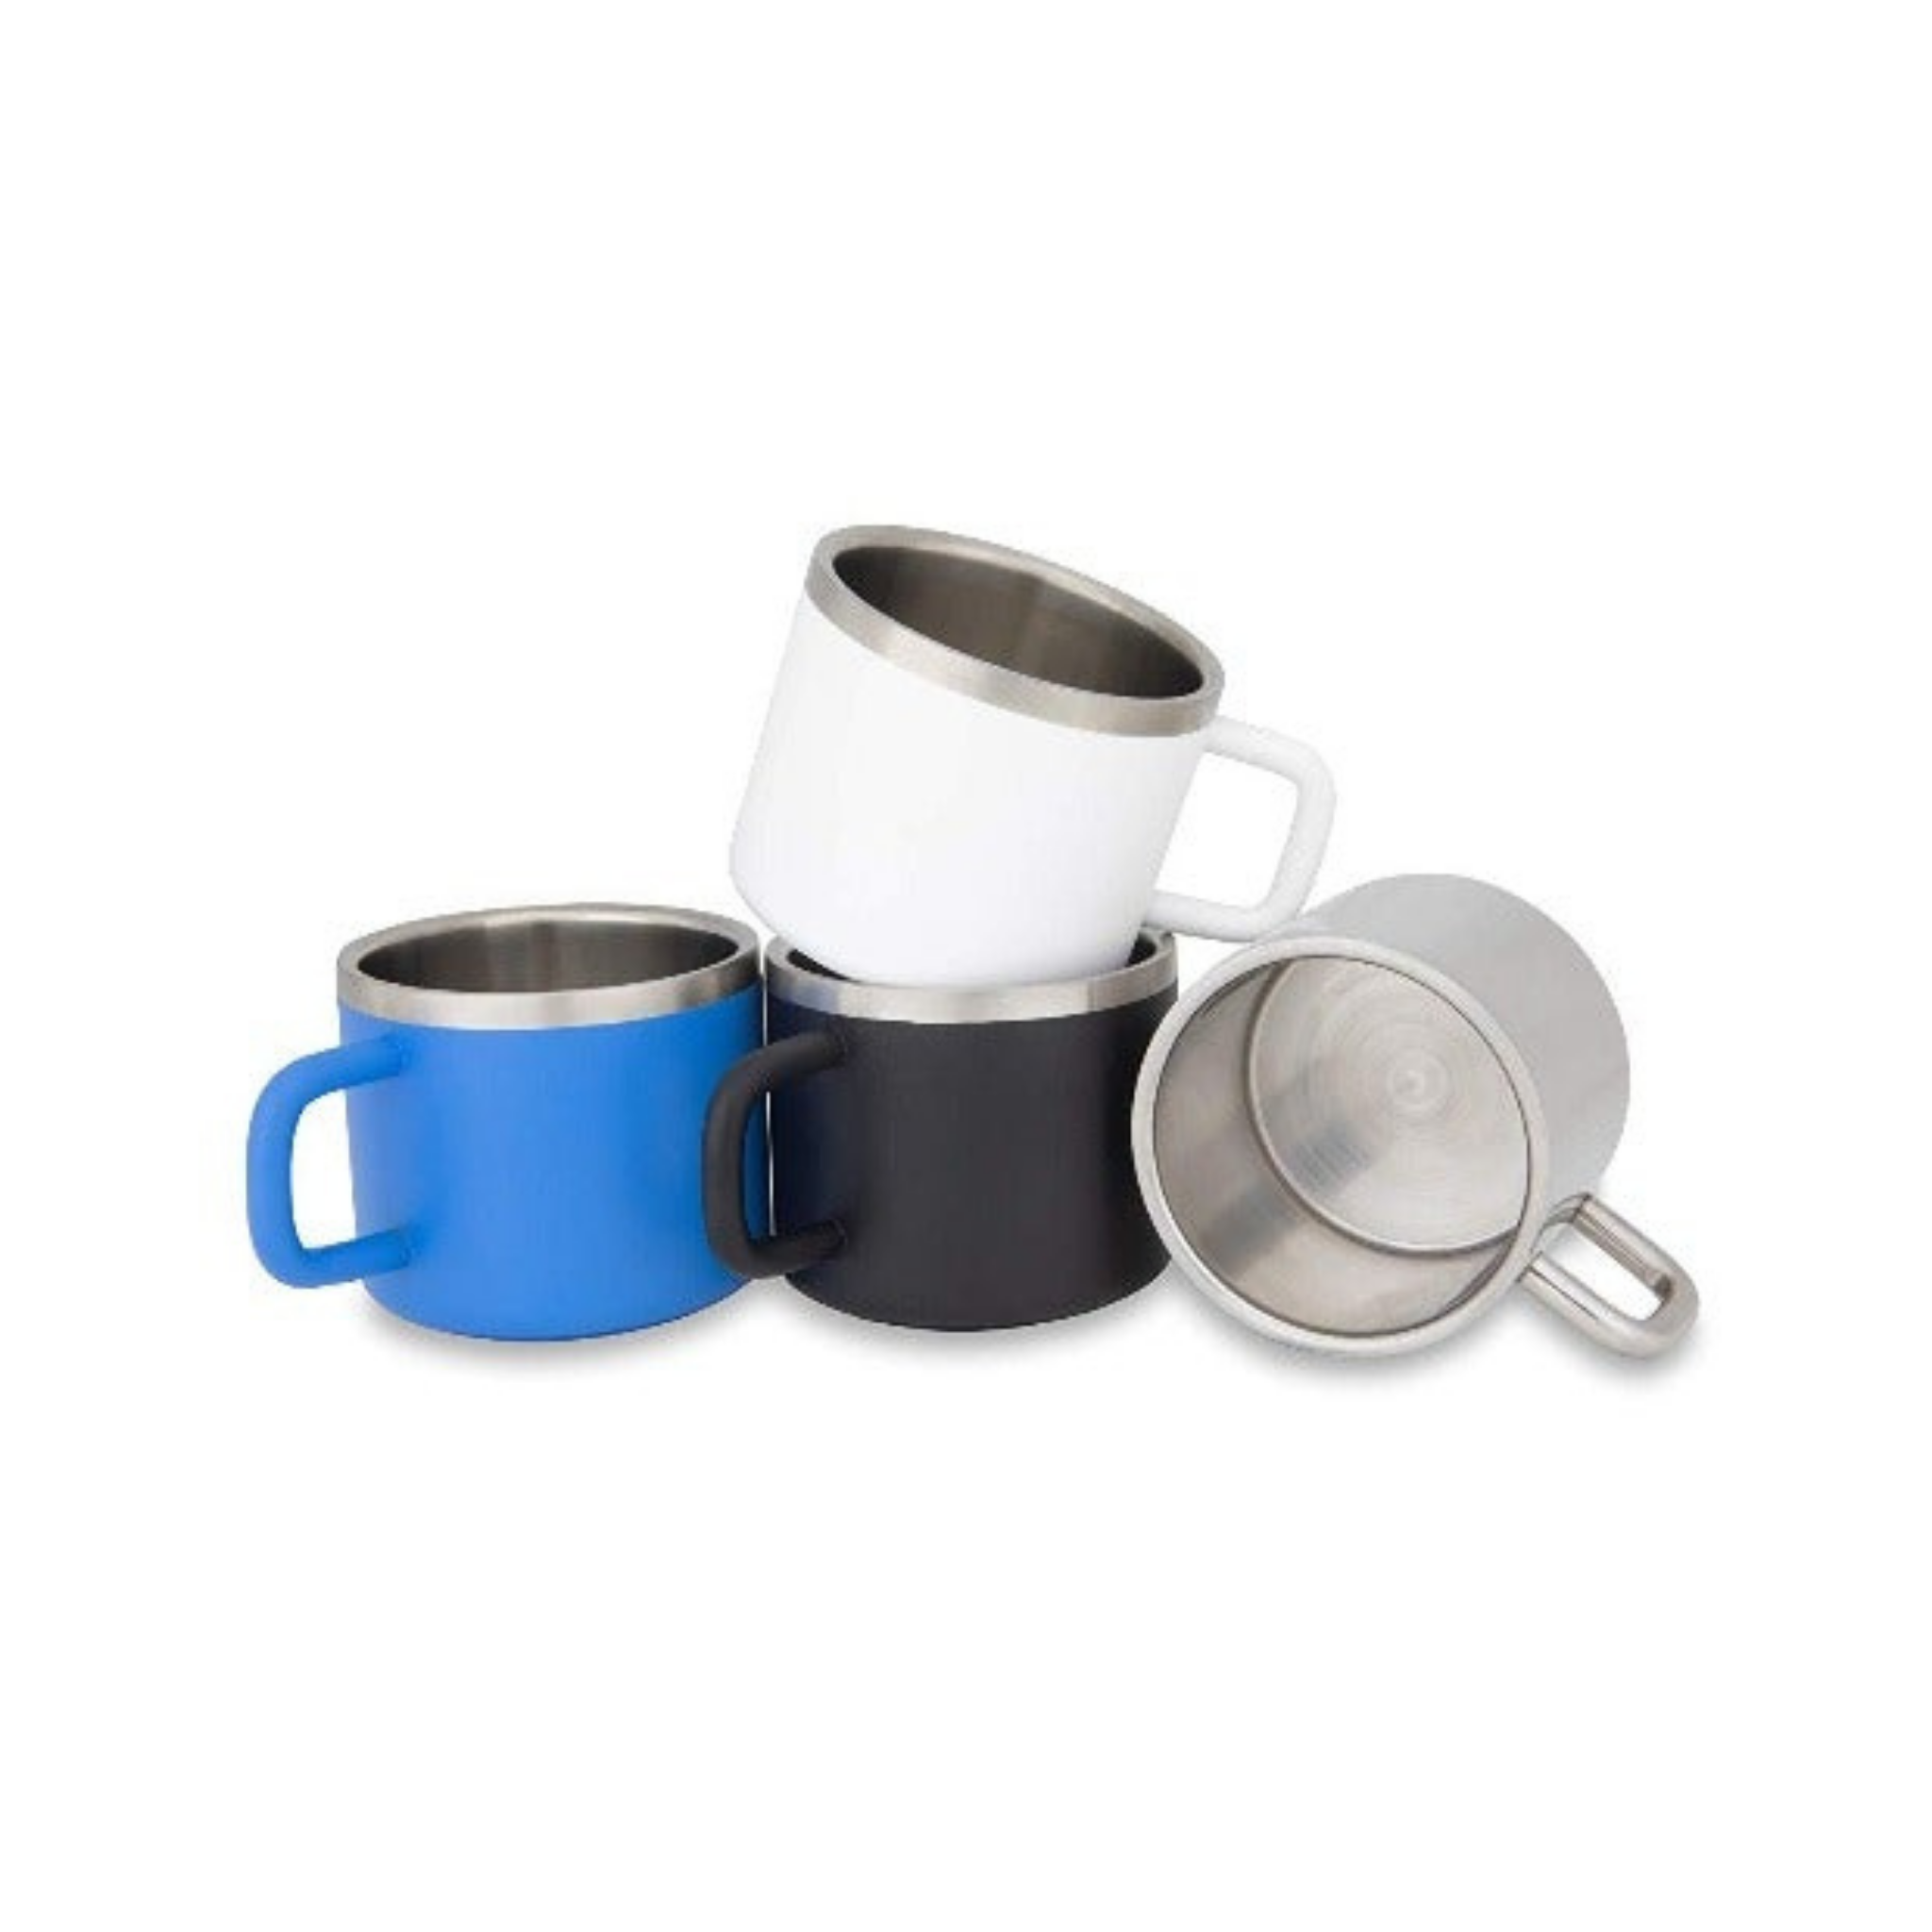 The Little Sipper - Stainless Steel Insulated Espresso Cups